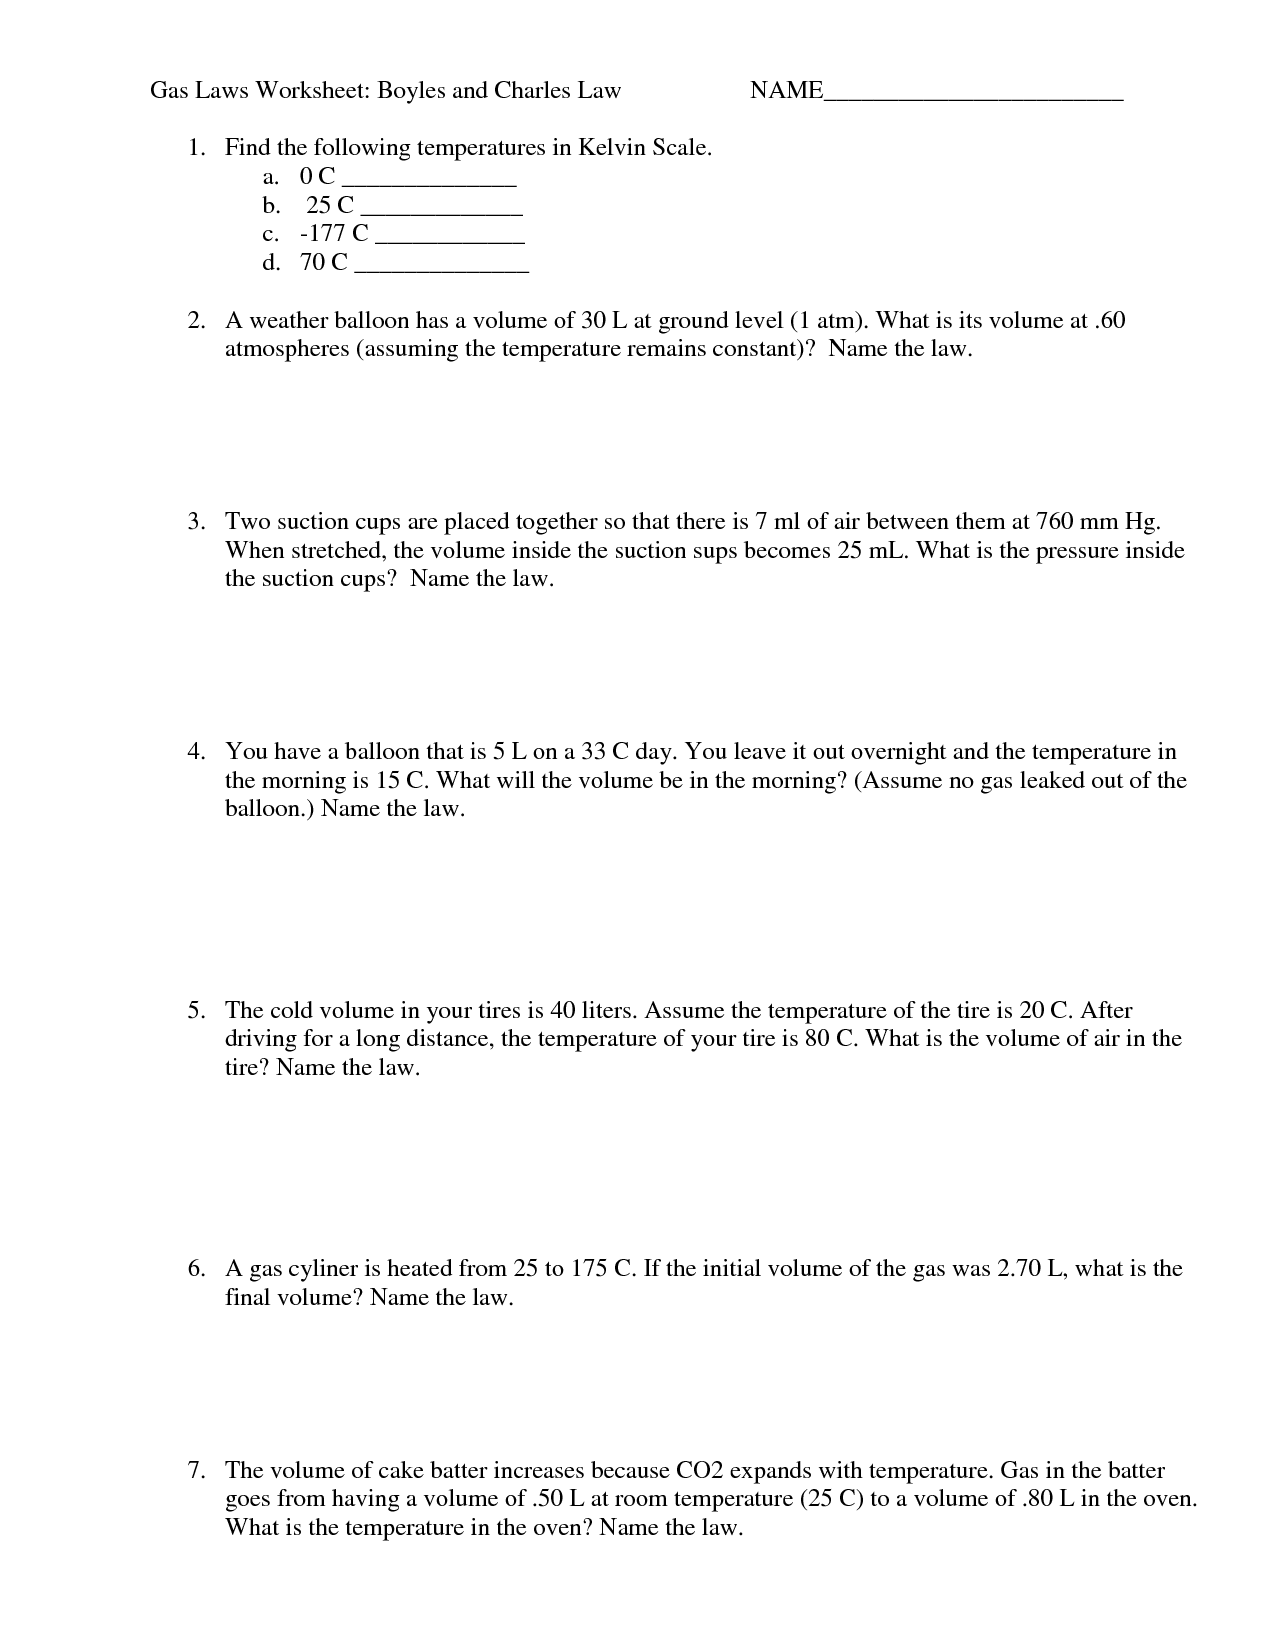 ideal-gas-law-worksheet-with-answer-key-free-isaac-sheet